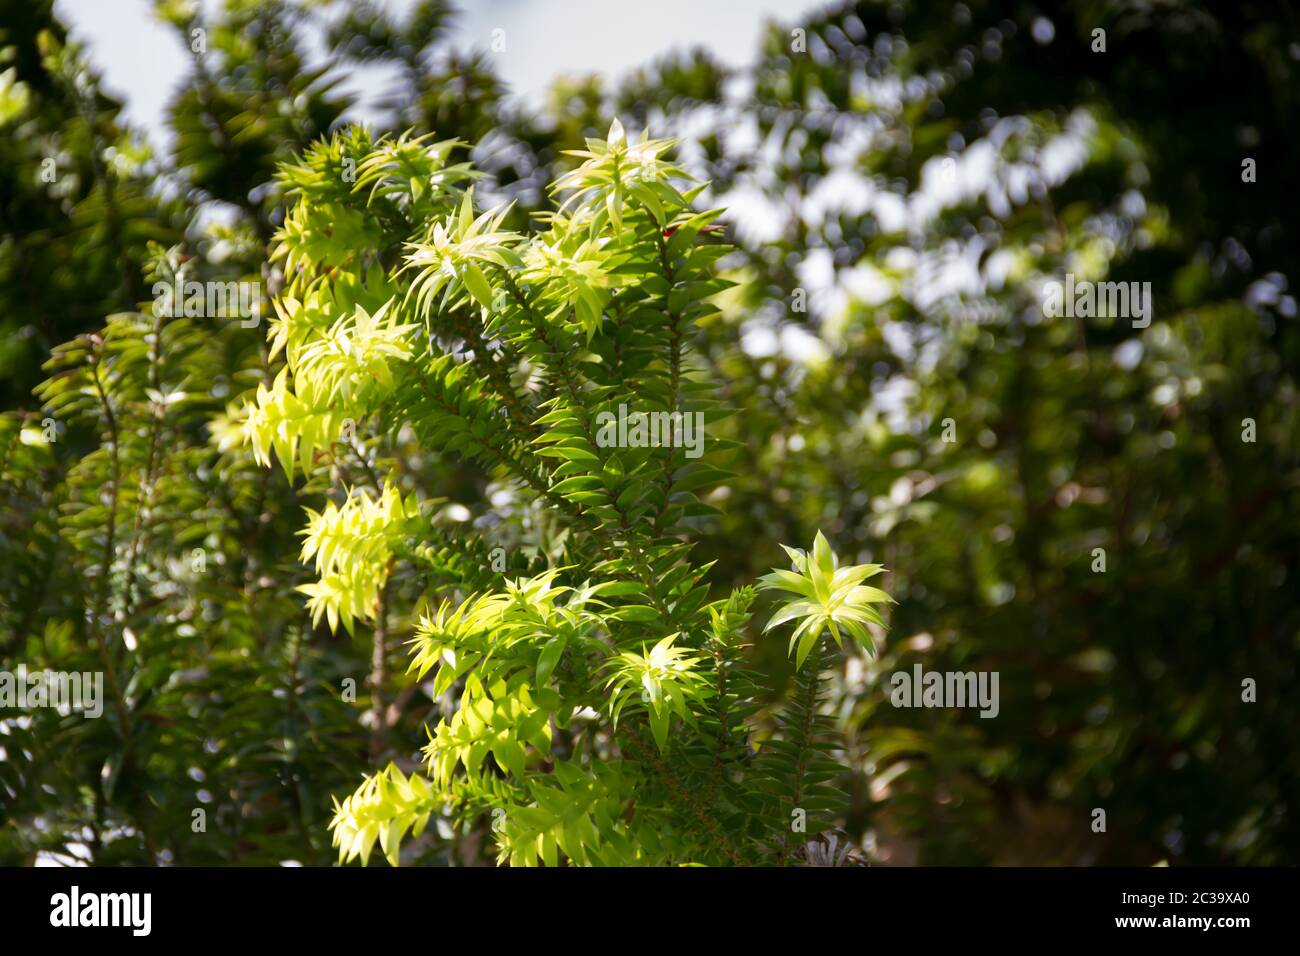 green araucaria on sky in summer Stock Photo